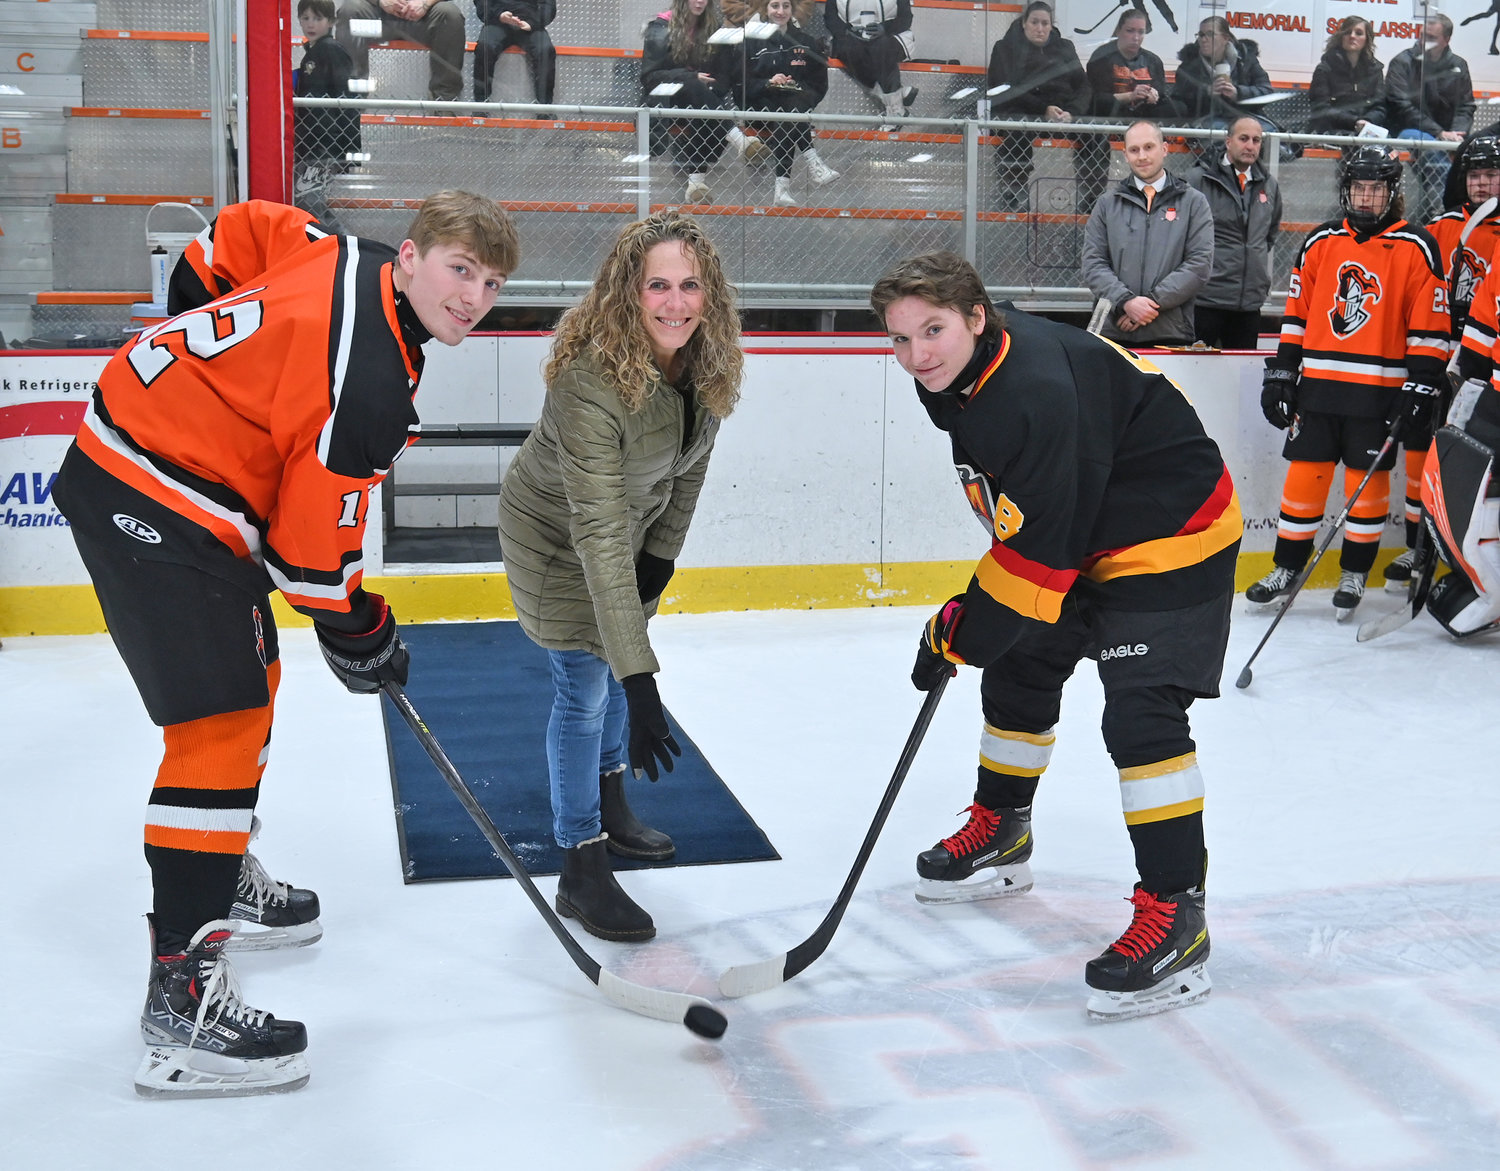 Lynn Mastracco, wife of Pete Mastracco, an RFA hockey assistant coach who died of colon cancer in August 2016, drops a ceremonial puck for the ninth annual Face Off against Colon Cancer game with RFA co-captain Jacob Premo, left, and Ontario Bay's Zach Blevins Tuesday night at Kennedy Arena. Premo scored twice and Blevins scored four times in Ontario Bay's 5-4 overtime win.